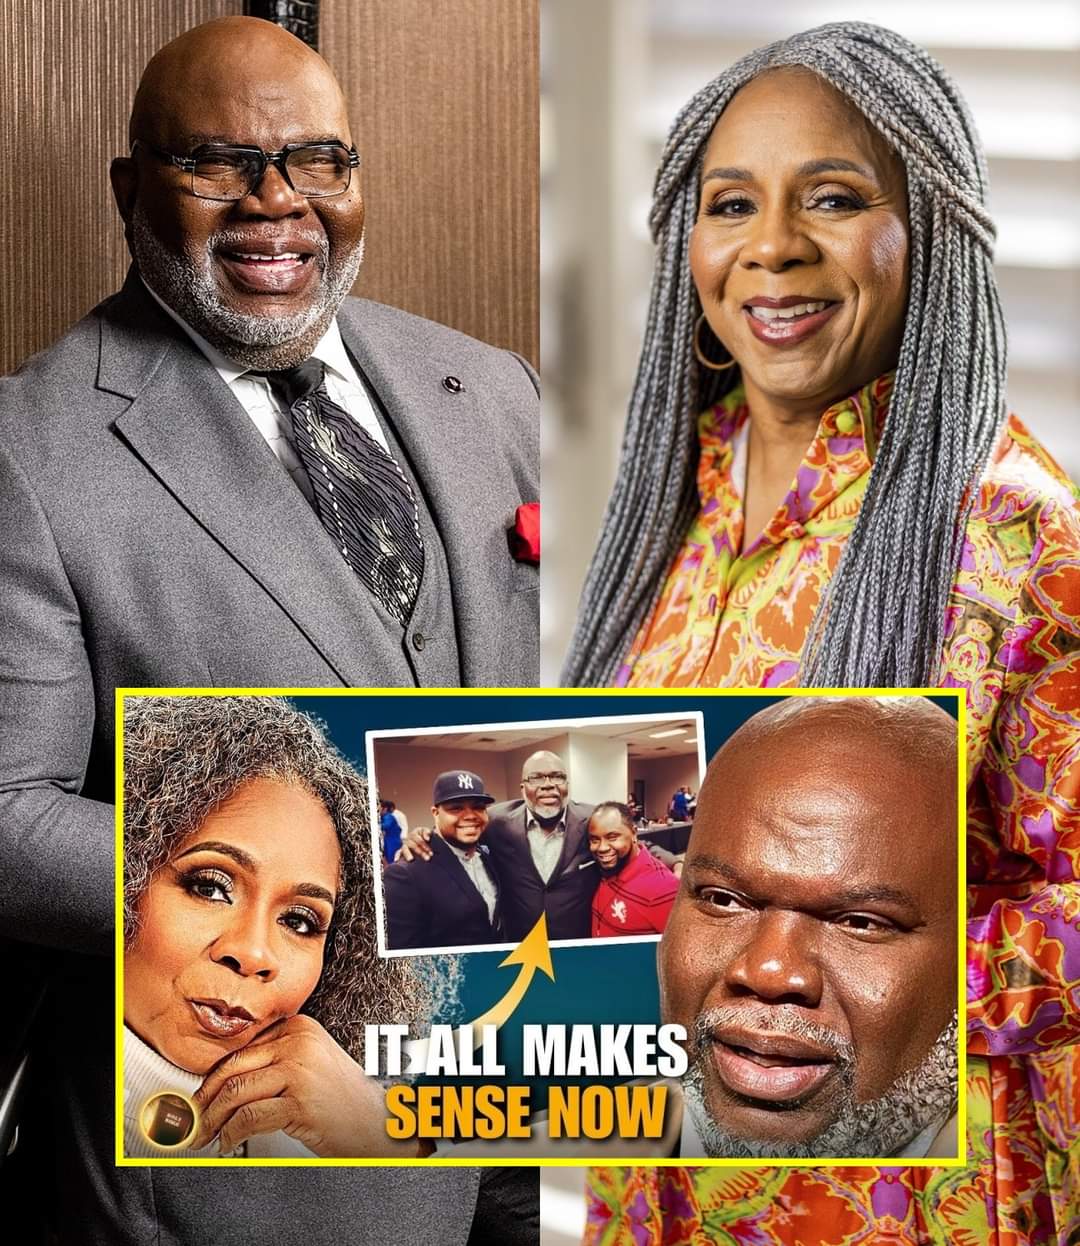 His Wife Knew All Along! Eye Witness Gives THRILLING Testimony Of TD Jakes & His Son’s Gay Lifestyle